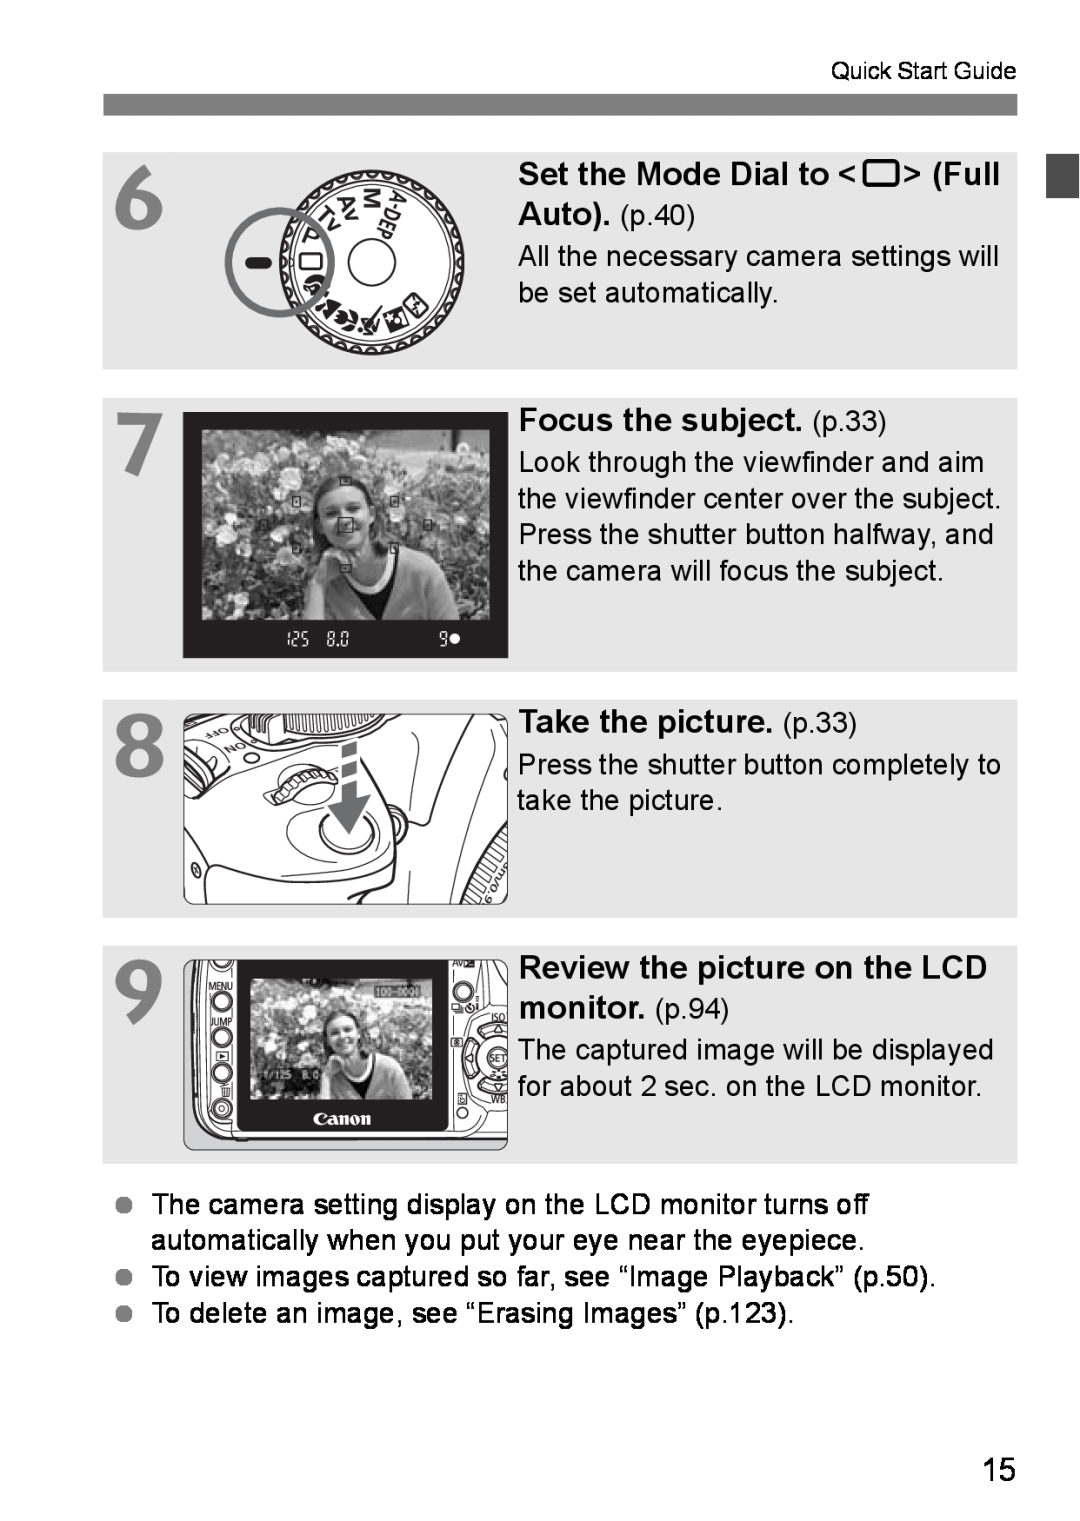 Canon EOS DIGITAL REBEL XTI Set the Mode Dial to 1 Full, Auto. p.40, Focus the subject. p.33, Take the picture. p.33 